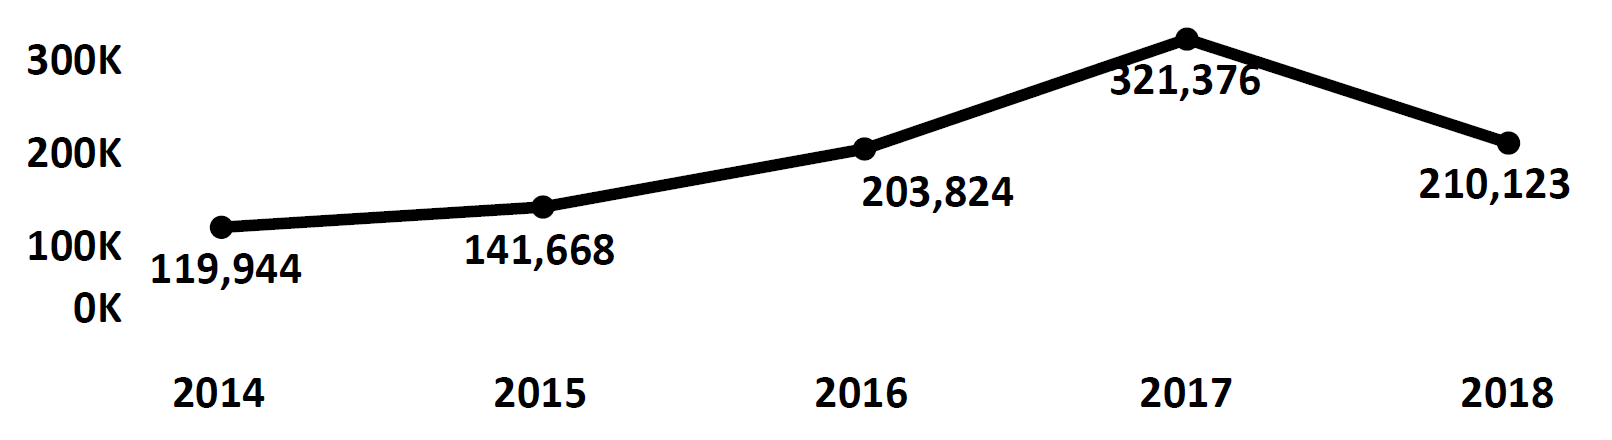 Graph of Do Not Call complaints recorded in New Jersey from fiscal year 2014 to fiscal year 2018. In 2014 there were 119,944 complaints filed, which increased each year peaking at 321,376 in 2017. In 2018 there were 210,123 complaints filed, fewer than 2017.